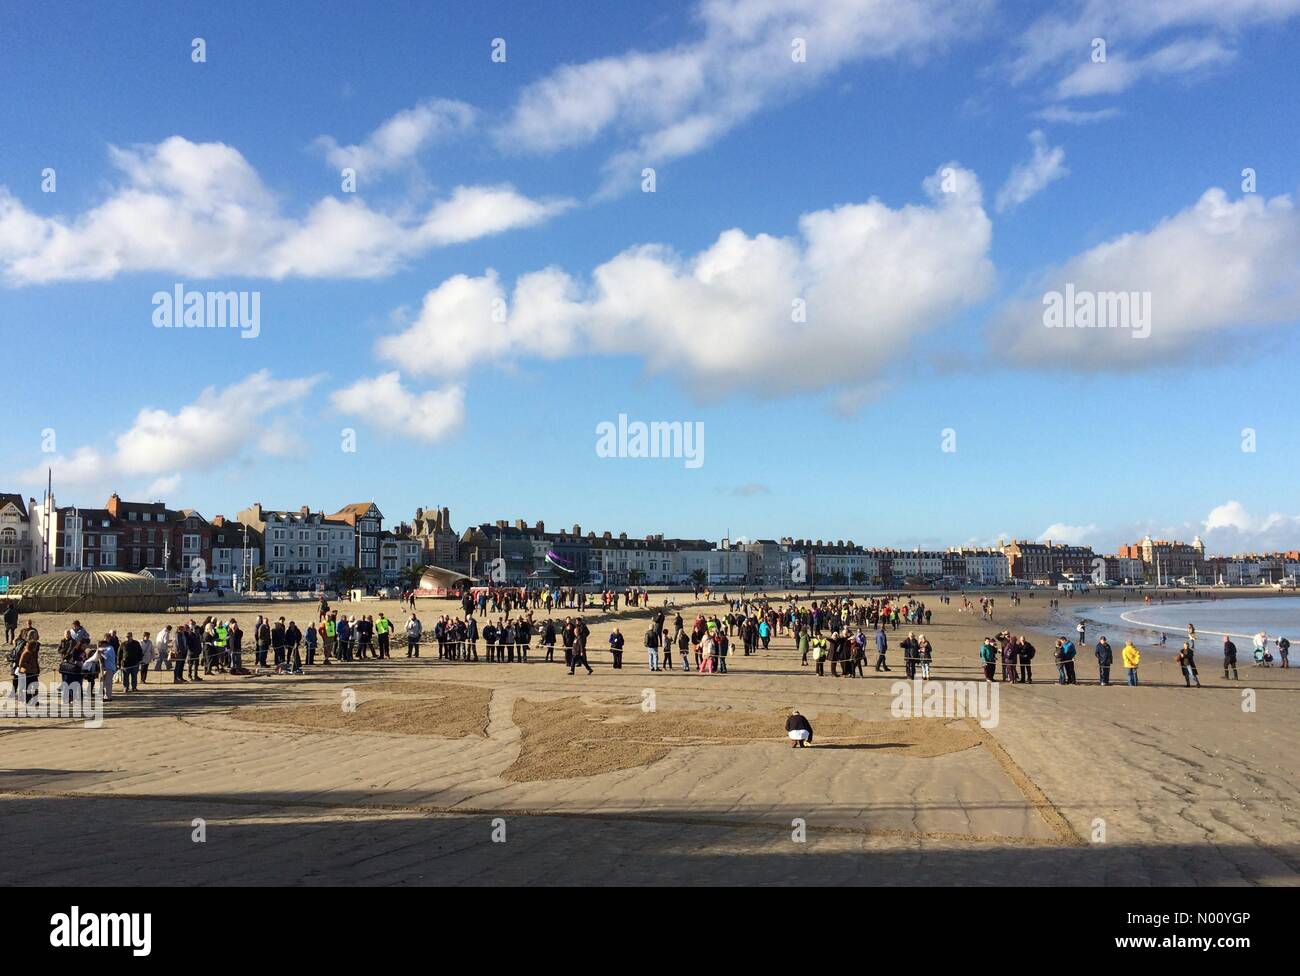 Weymouth, Dorset, UK. 11th Nov 2018. Danny Boyle's Pages of the Sea at Weymouth say thank you and goodbye on this centenary of the Armistice. Credit: Carolyn Jenkins/StockimoNews/Alamy Live News Stock Photo